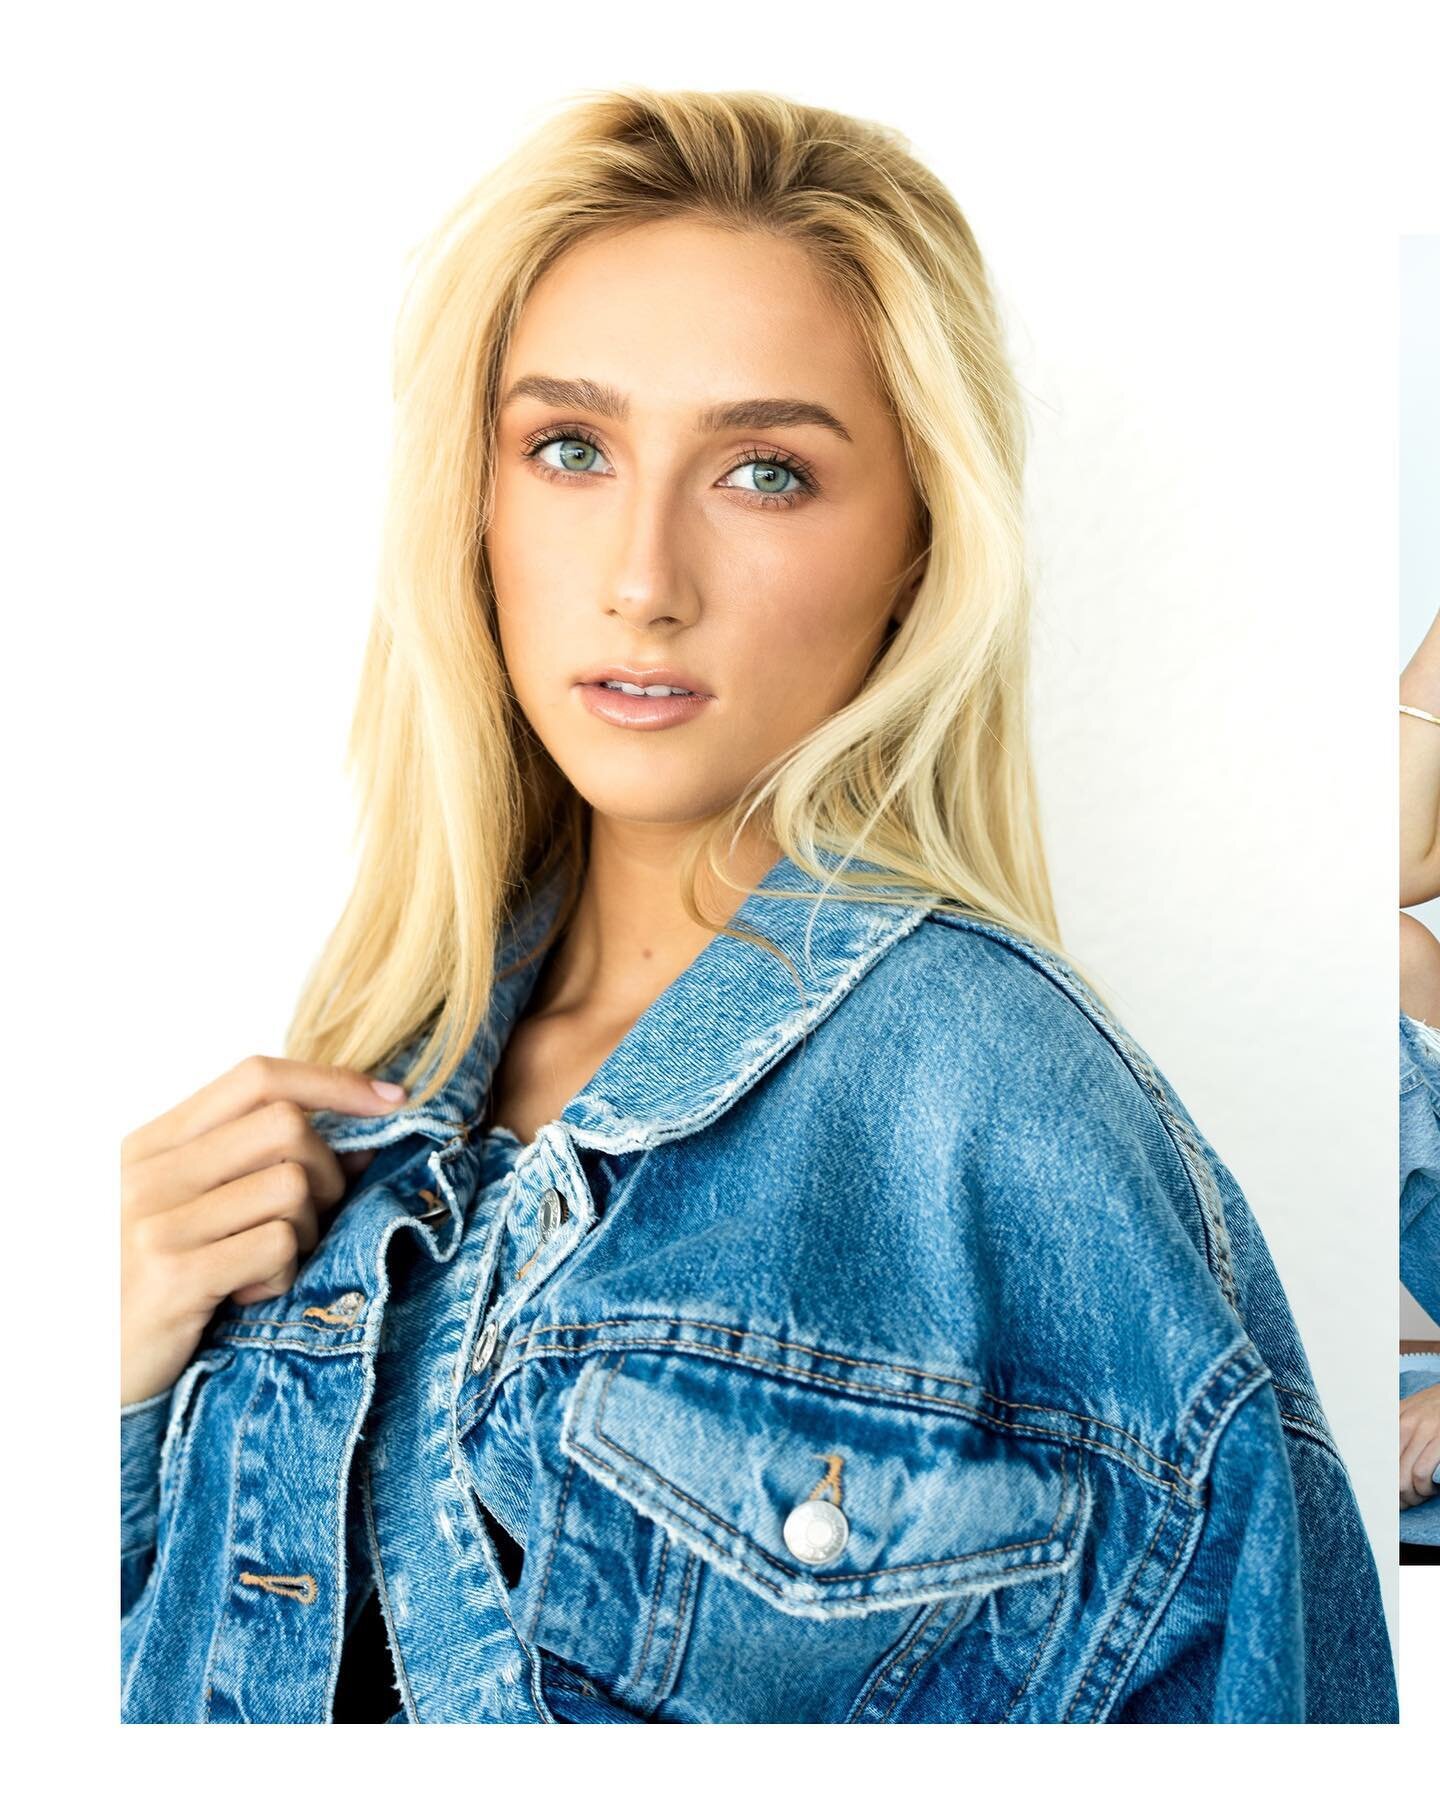 more good 👖🖤
pt 2. 
and we&rsquo;re so MAD(dy) about you!! 
&bull;
H&amp;M @alileemua 
.
.
.
#studio #studiosession #denim #seniors #fashion #photoshoot #sessions #edits #denimseries